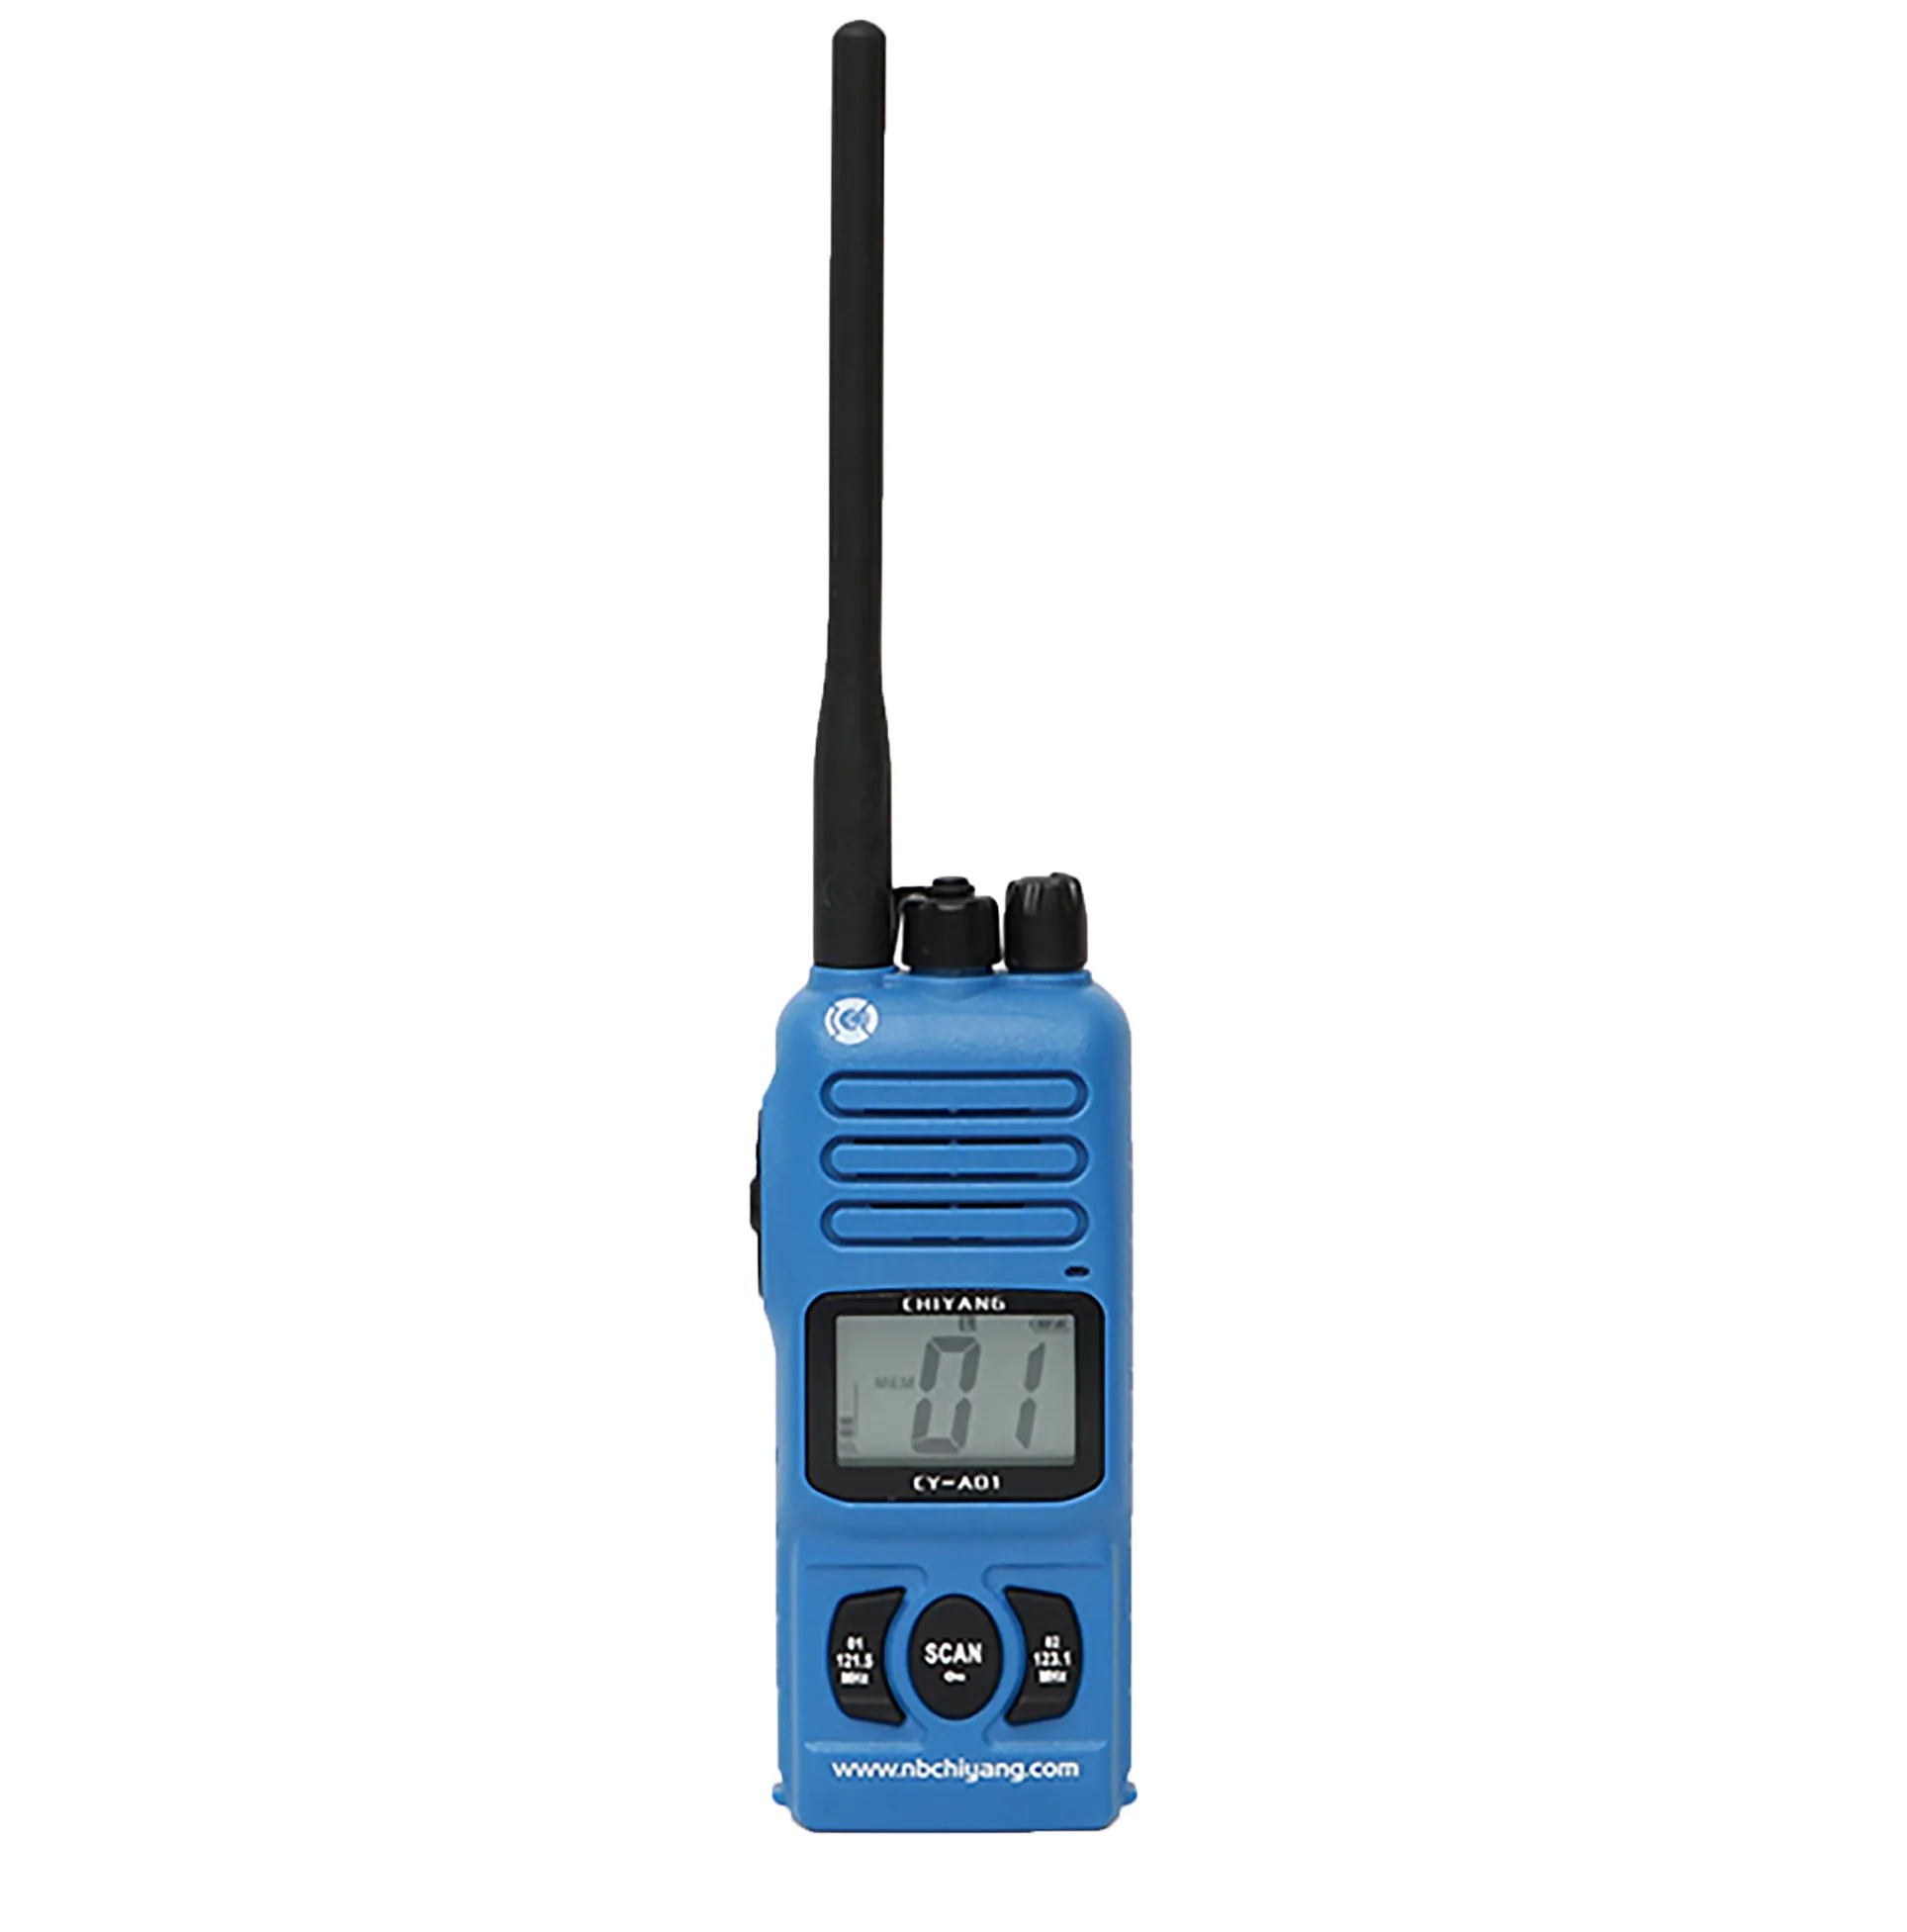 Two-way VHF radio phone with CCS certificate